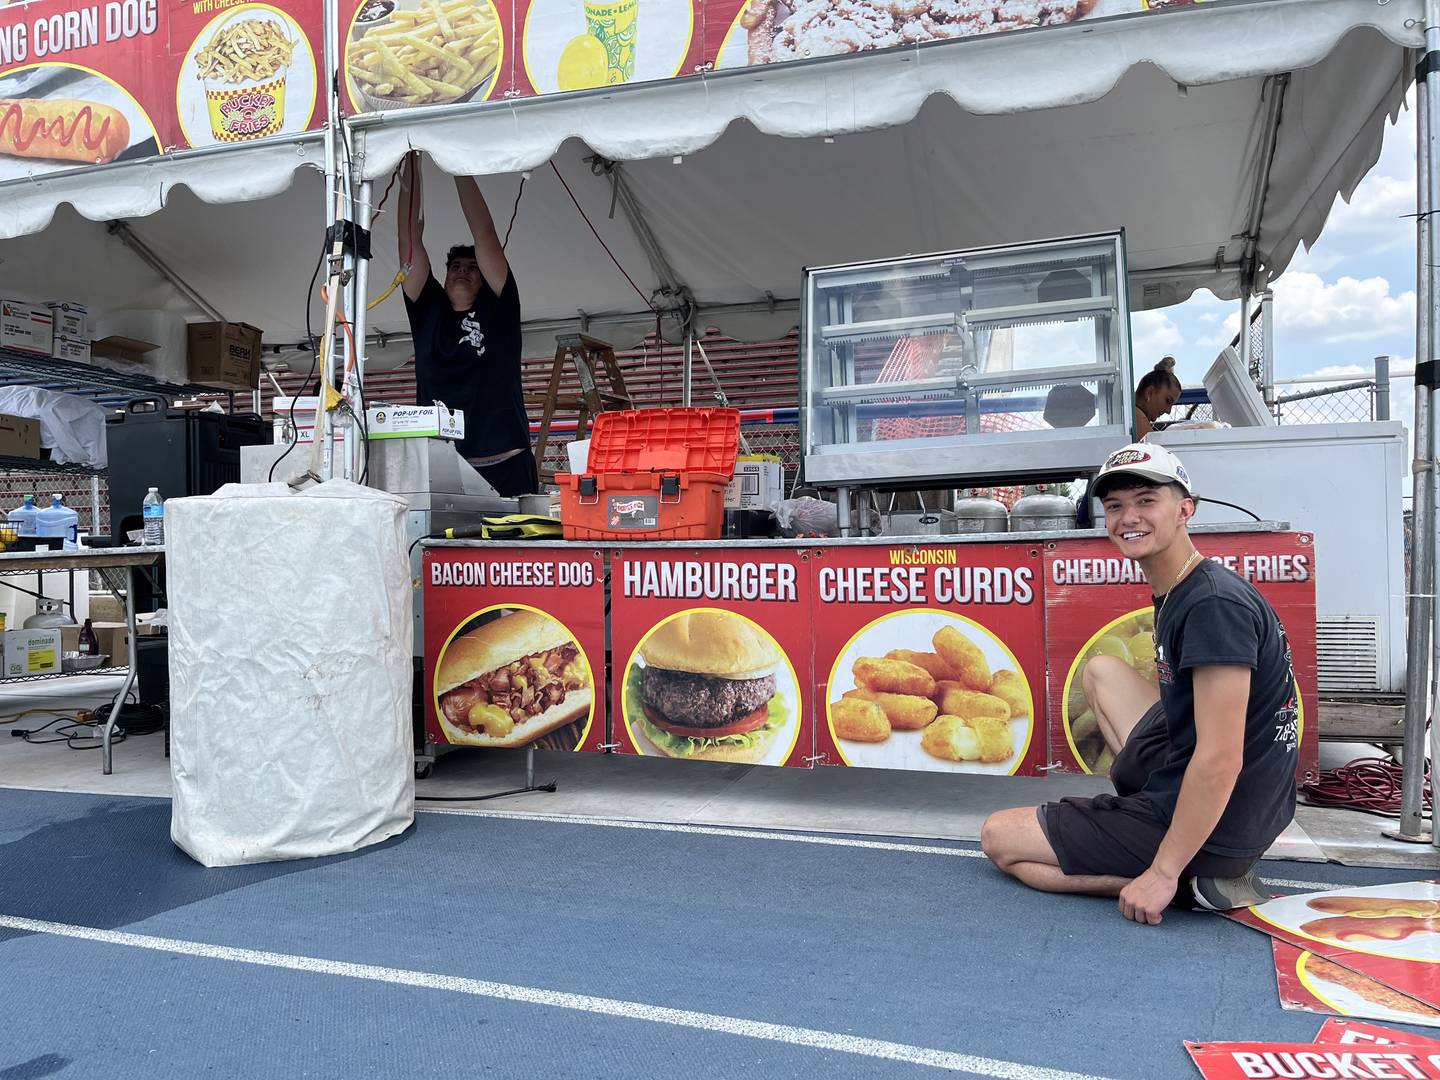 Sal Memeti (right), manager of Barone's Pizza of Countryside, sets up the food vendor stand for the restaurant on Thursday, June 20, ahead of the Taste of Joliet at Joliet Memorial Stadium in Joliet.